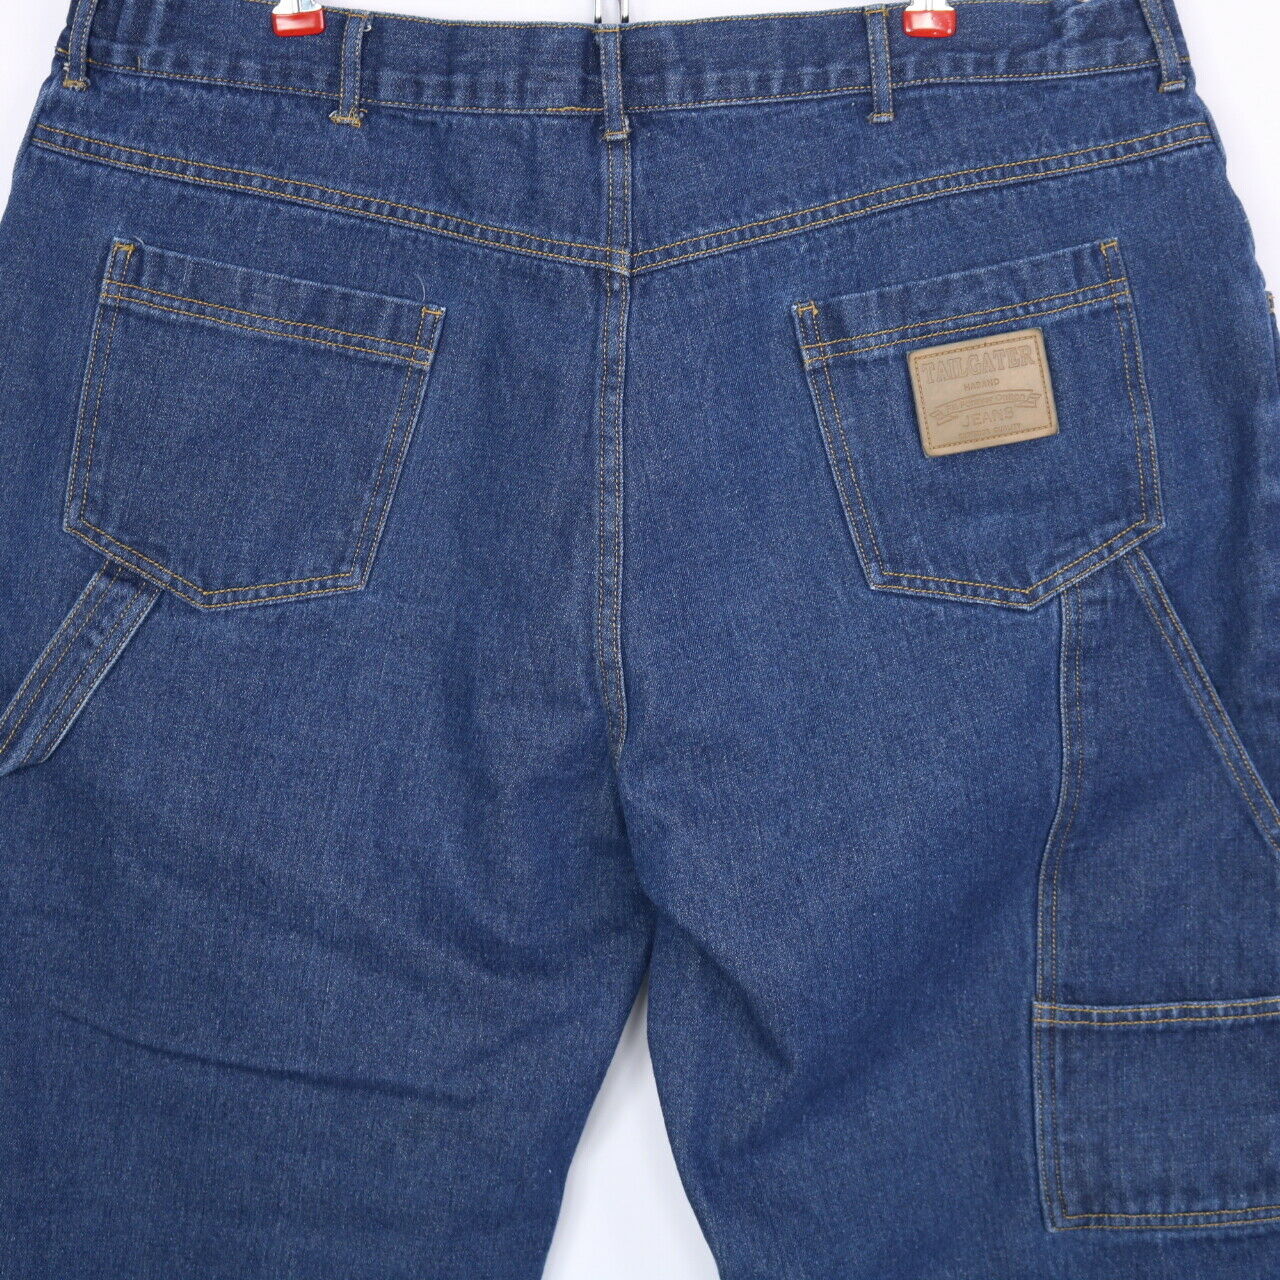 The Haband Tailgater Mens Carpenter Jeans Size 40S 40 Expandable ...